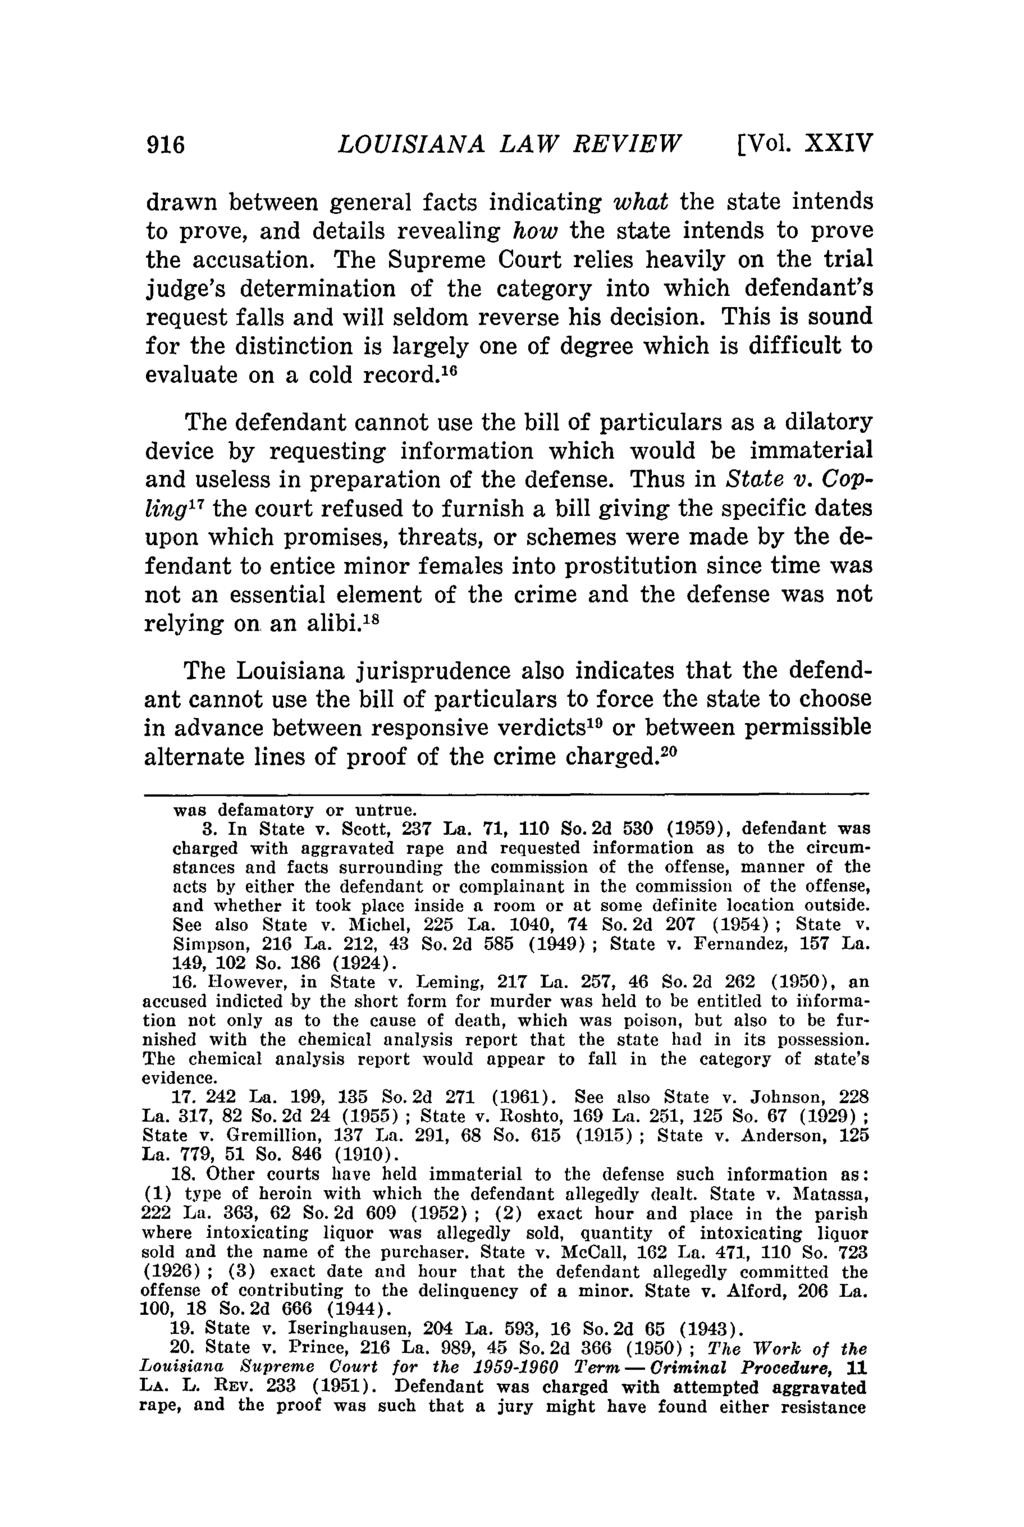 LOUISIANA LAW REVIEW [Vol. XXIV drawn between general facts indicating what the state intends to prove, and details revealing how the state intends to prove the accusation.